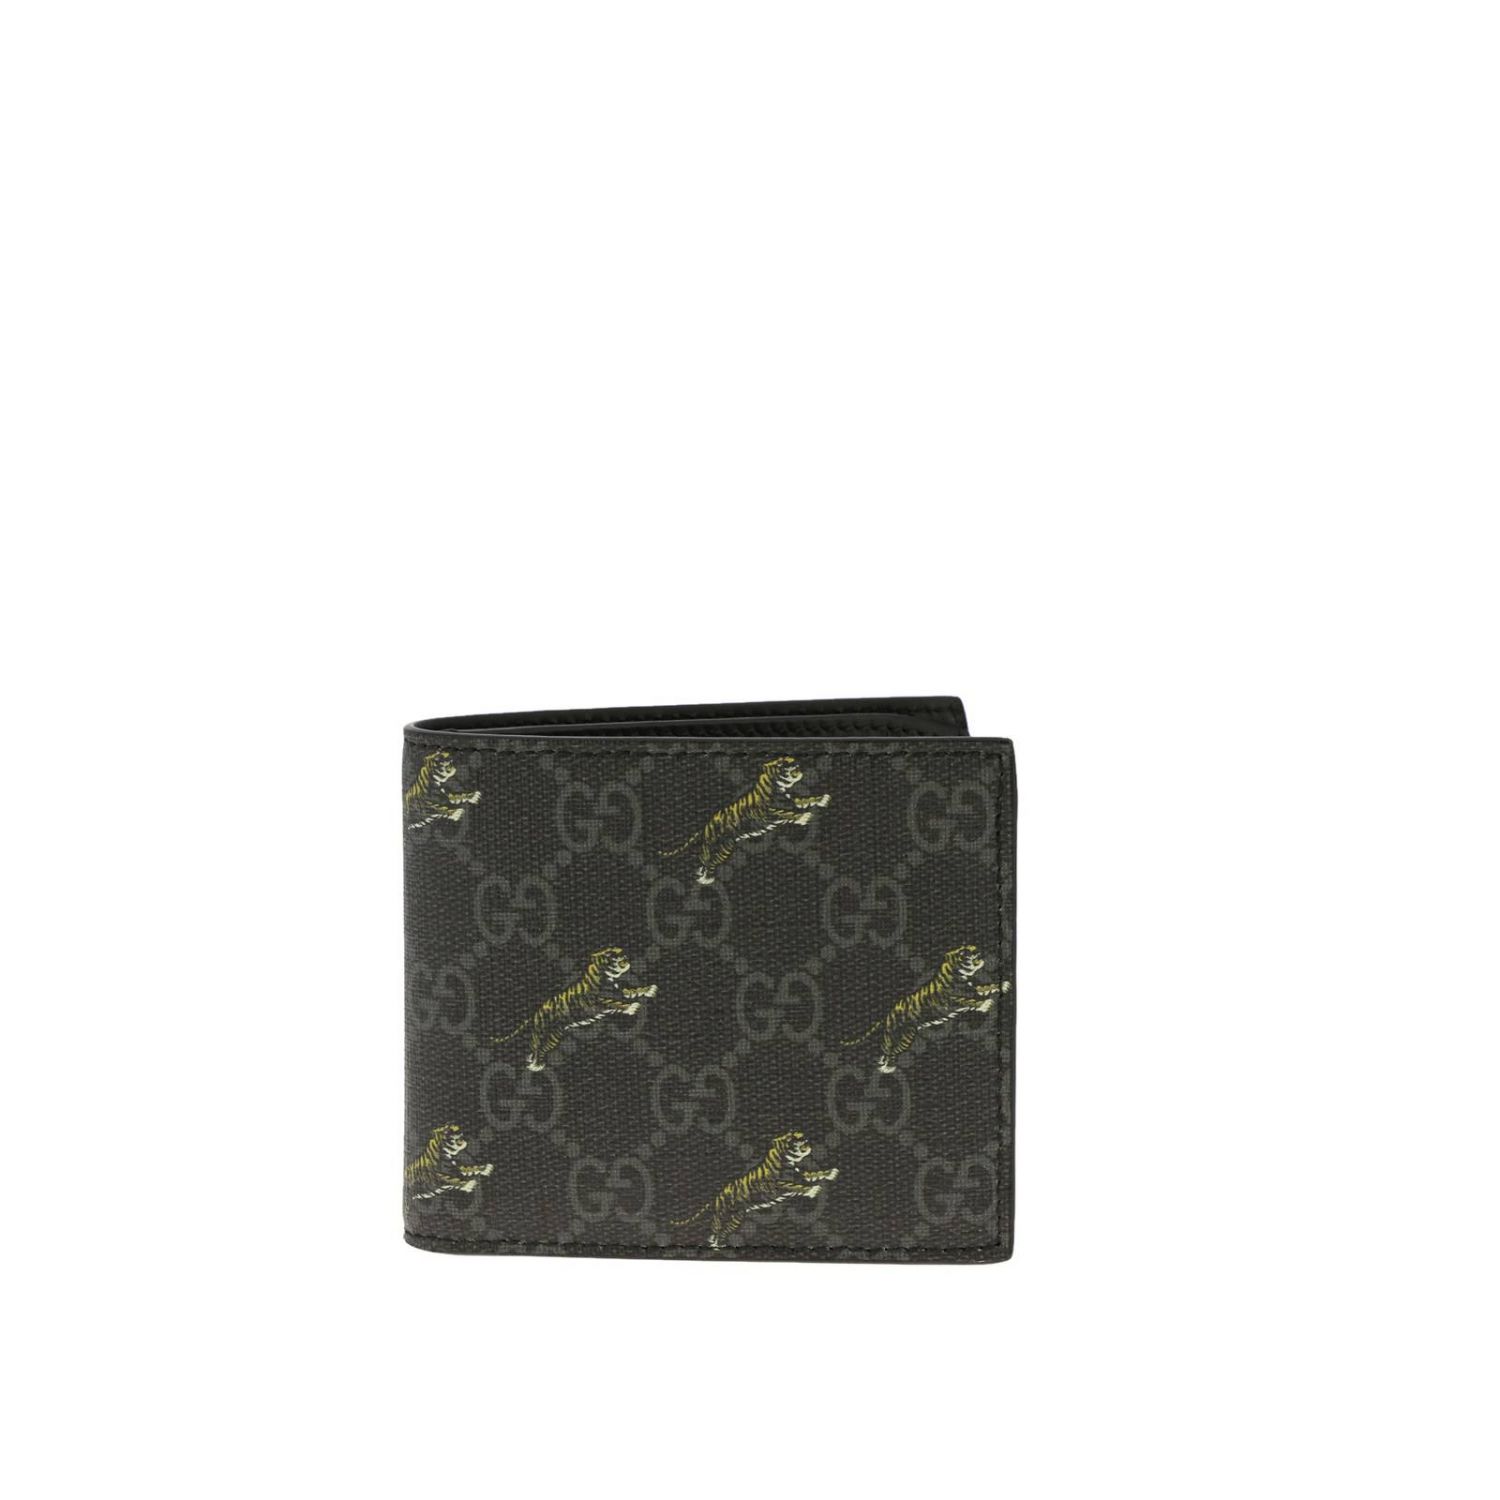 GUCCI: Supreme wallet with all over tiger print - Black | Gucci wallet ...